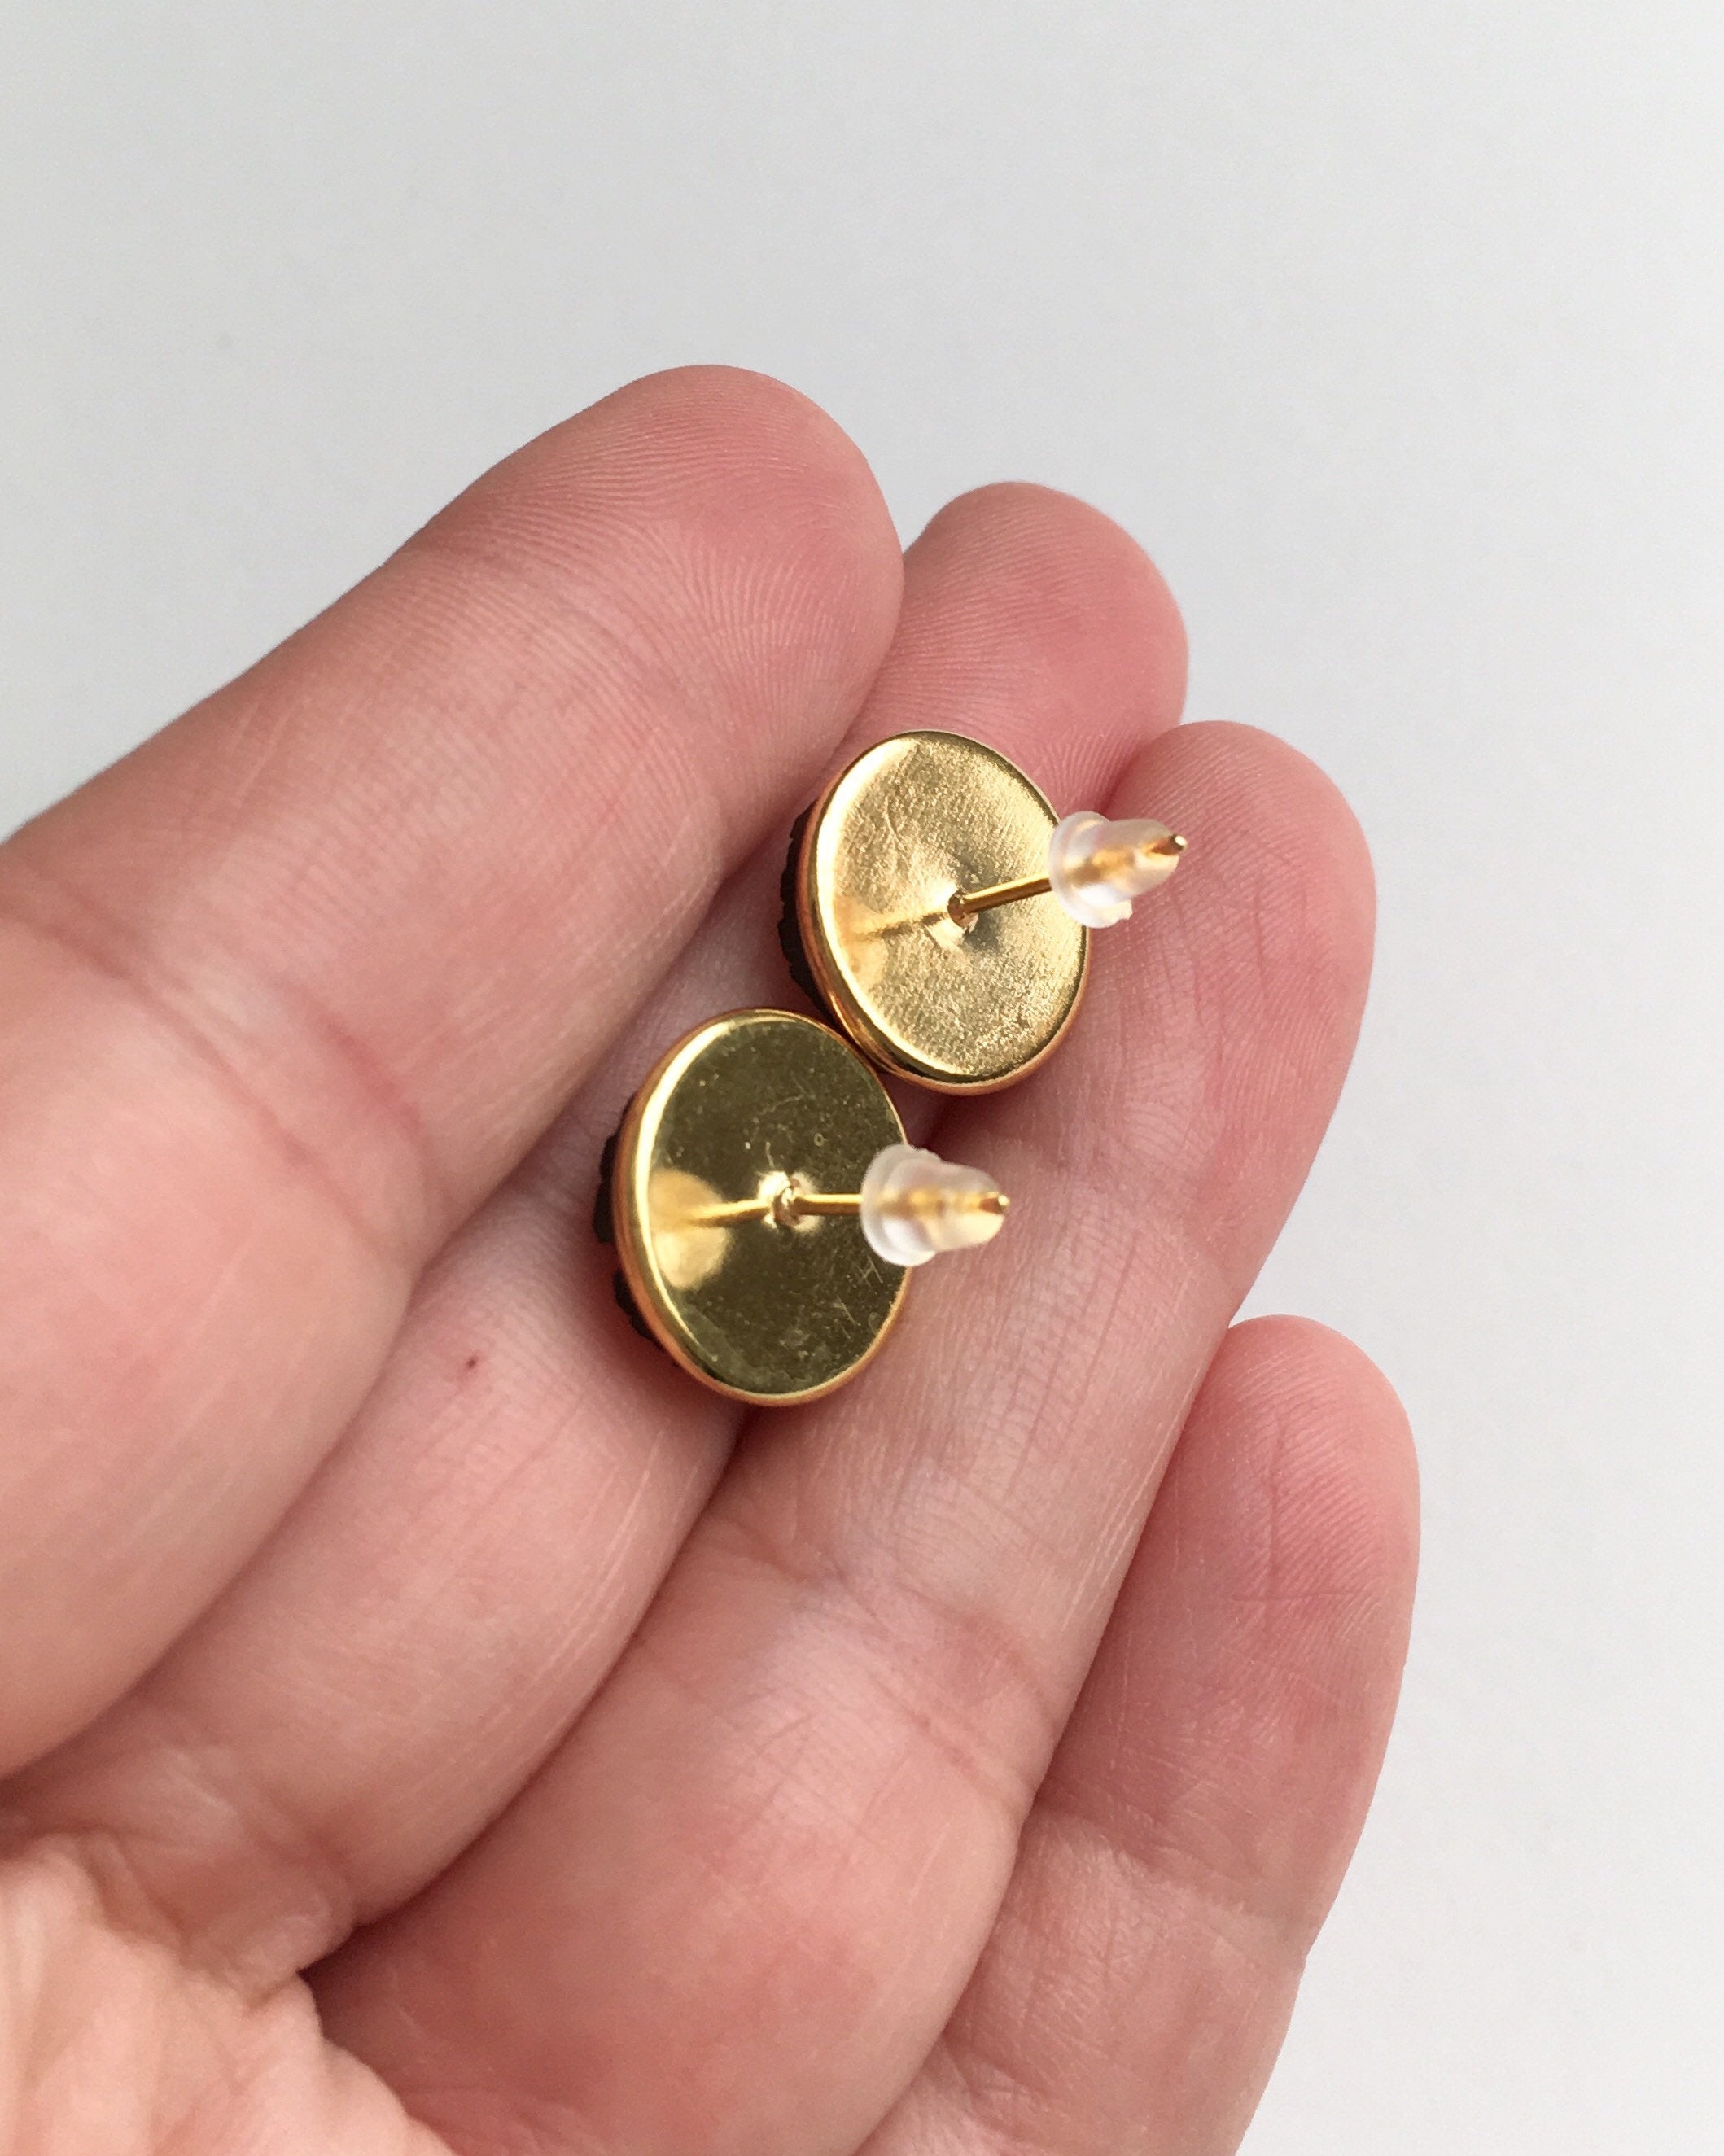 Back of stud earrings with rubber backs